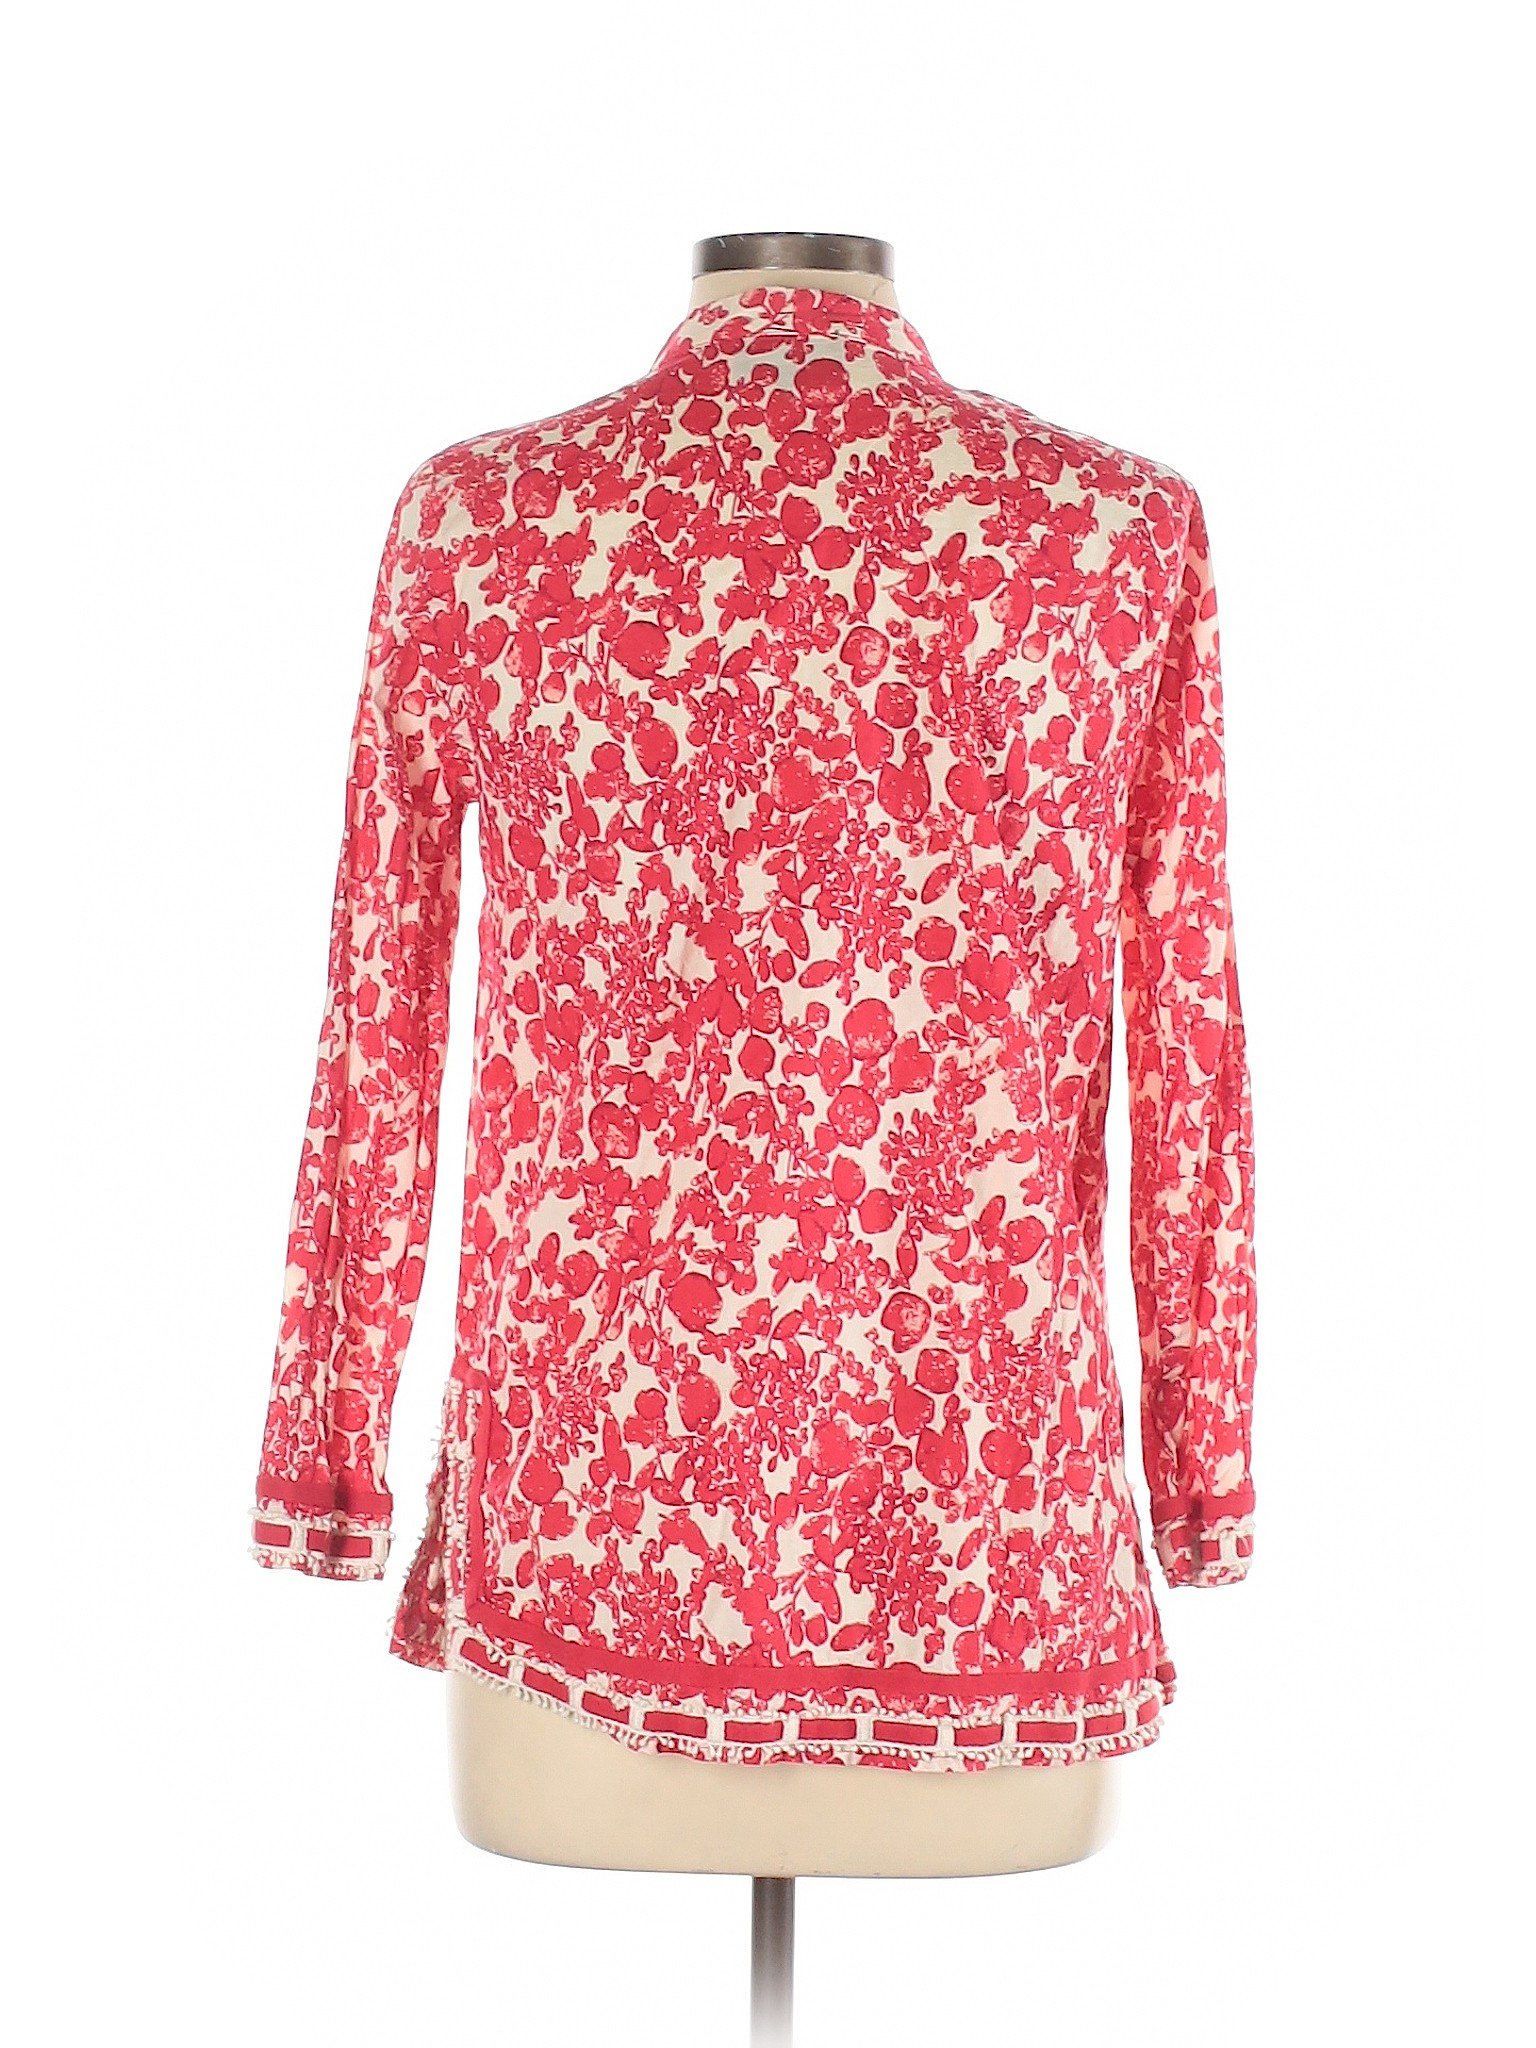 cynthia rowley for marshalls Women's Blouses On Sale Up To 90% Off ...